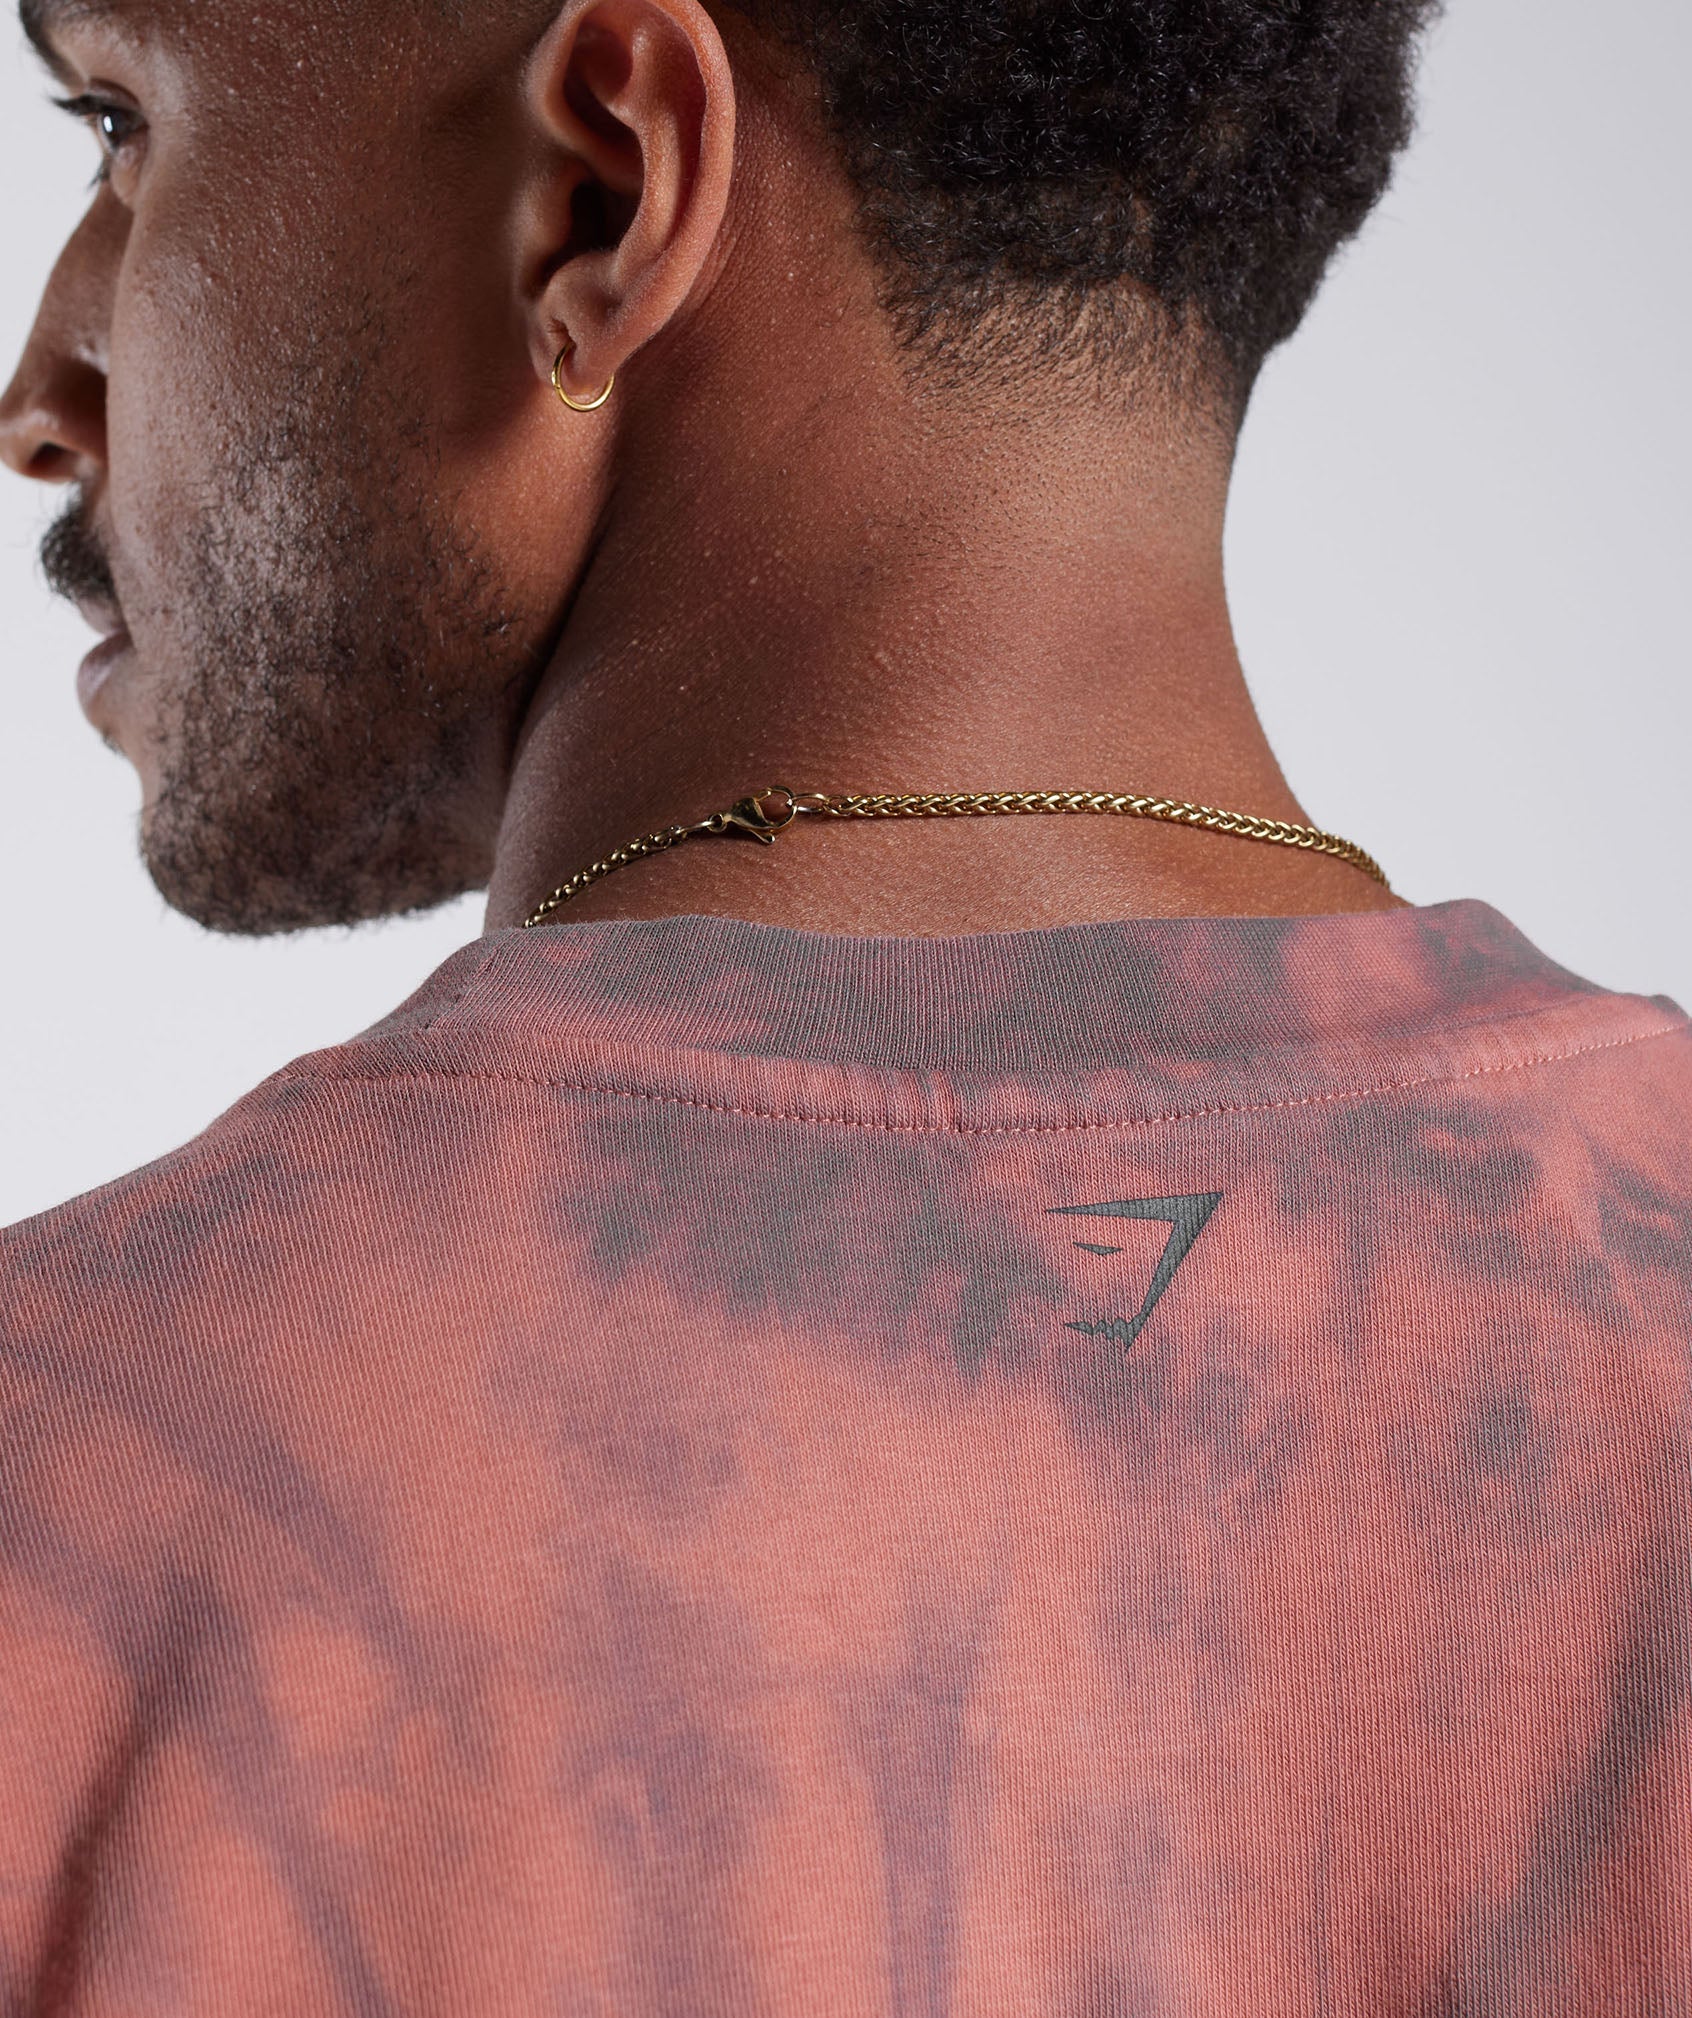 Rest Day T-Shirt in Terracotta Pink/Dusty Maroon/Spiral Optic Wash - view 5